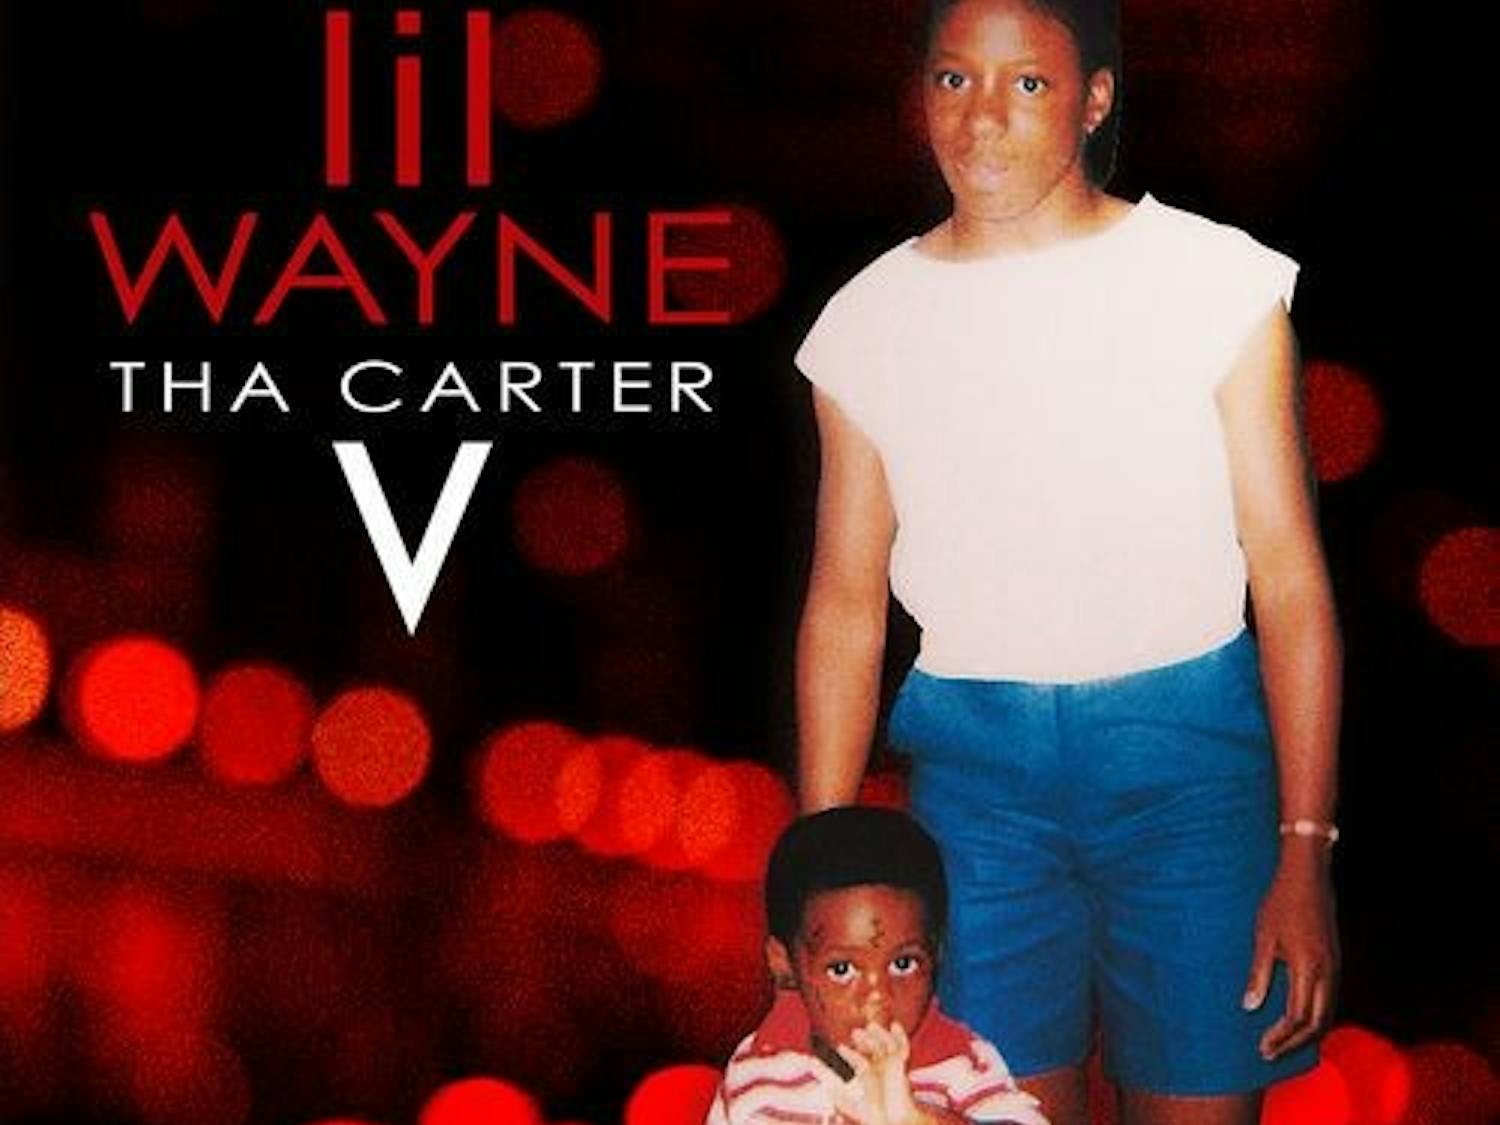 Lil’ Wayne’s changed commentary on wealth and success acts as a breath of fresh air on “Tha Carter V.” The album was released on Sept. 28, five years after being announced because of label disputes.&nbsp;